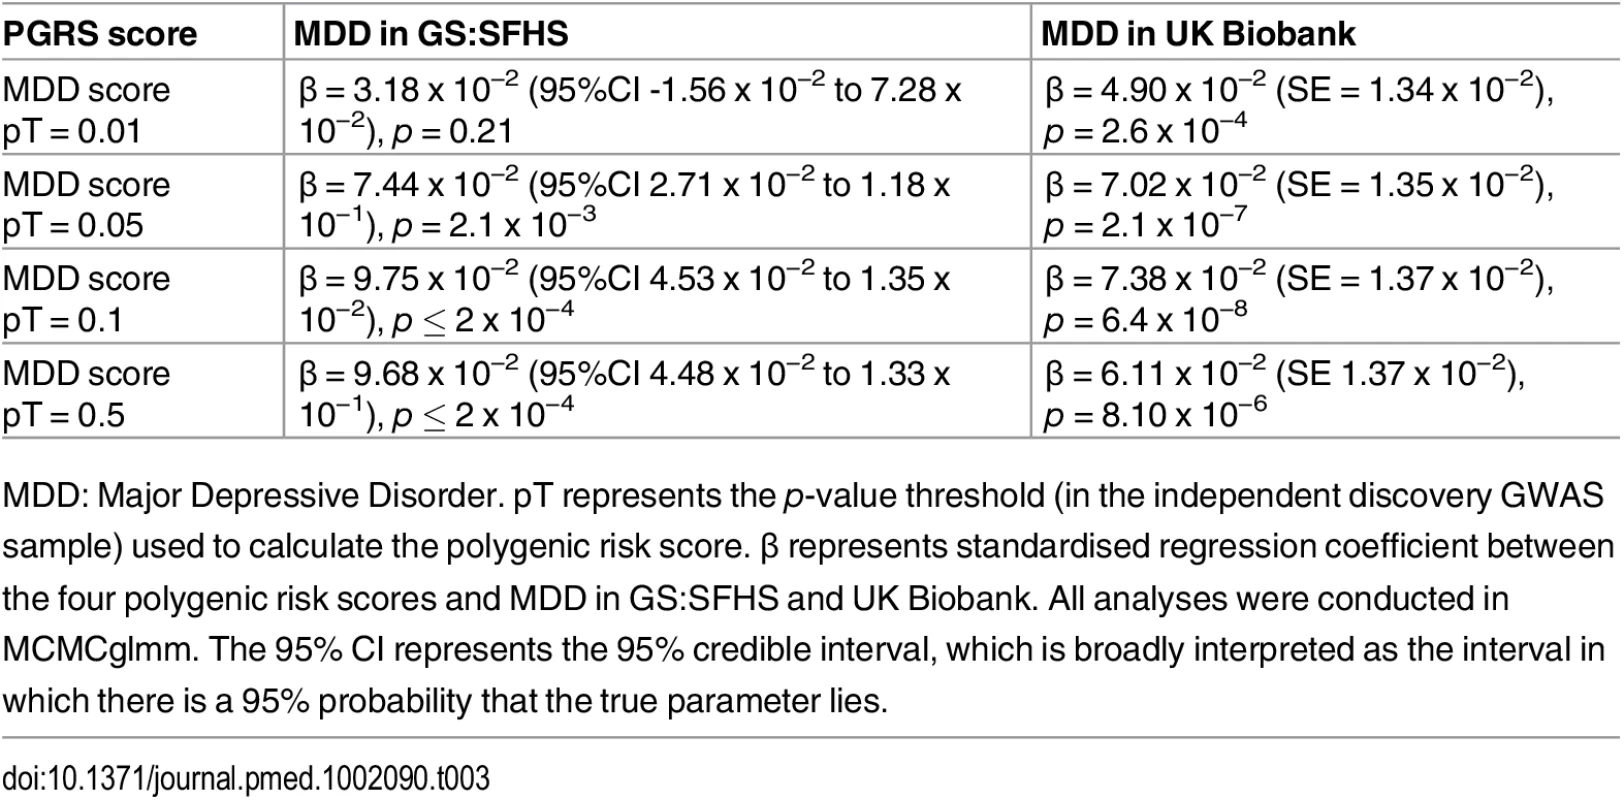 Association between MDD-related traits in GS:SFHS and UK Biobank with the Psychiatric Genomics Consortium derived MDD polygenic risk scores.